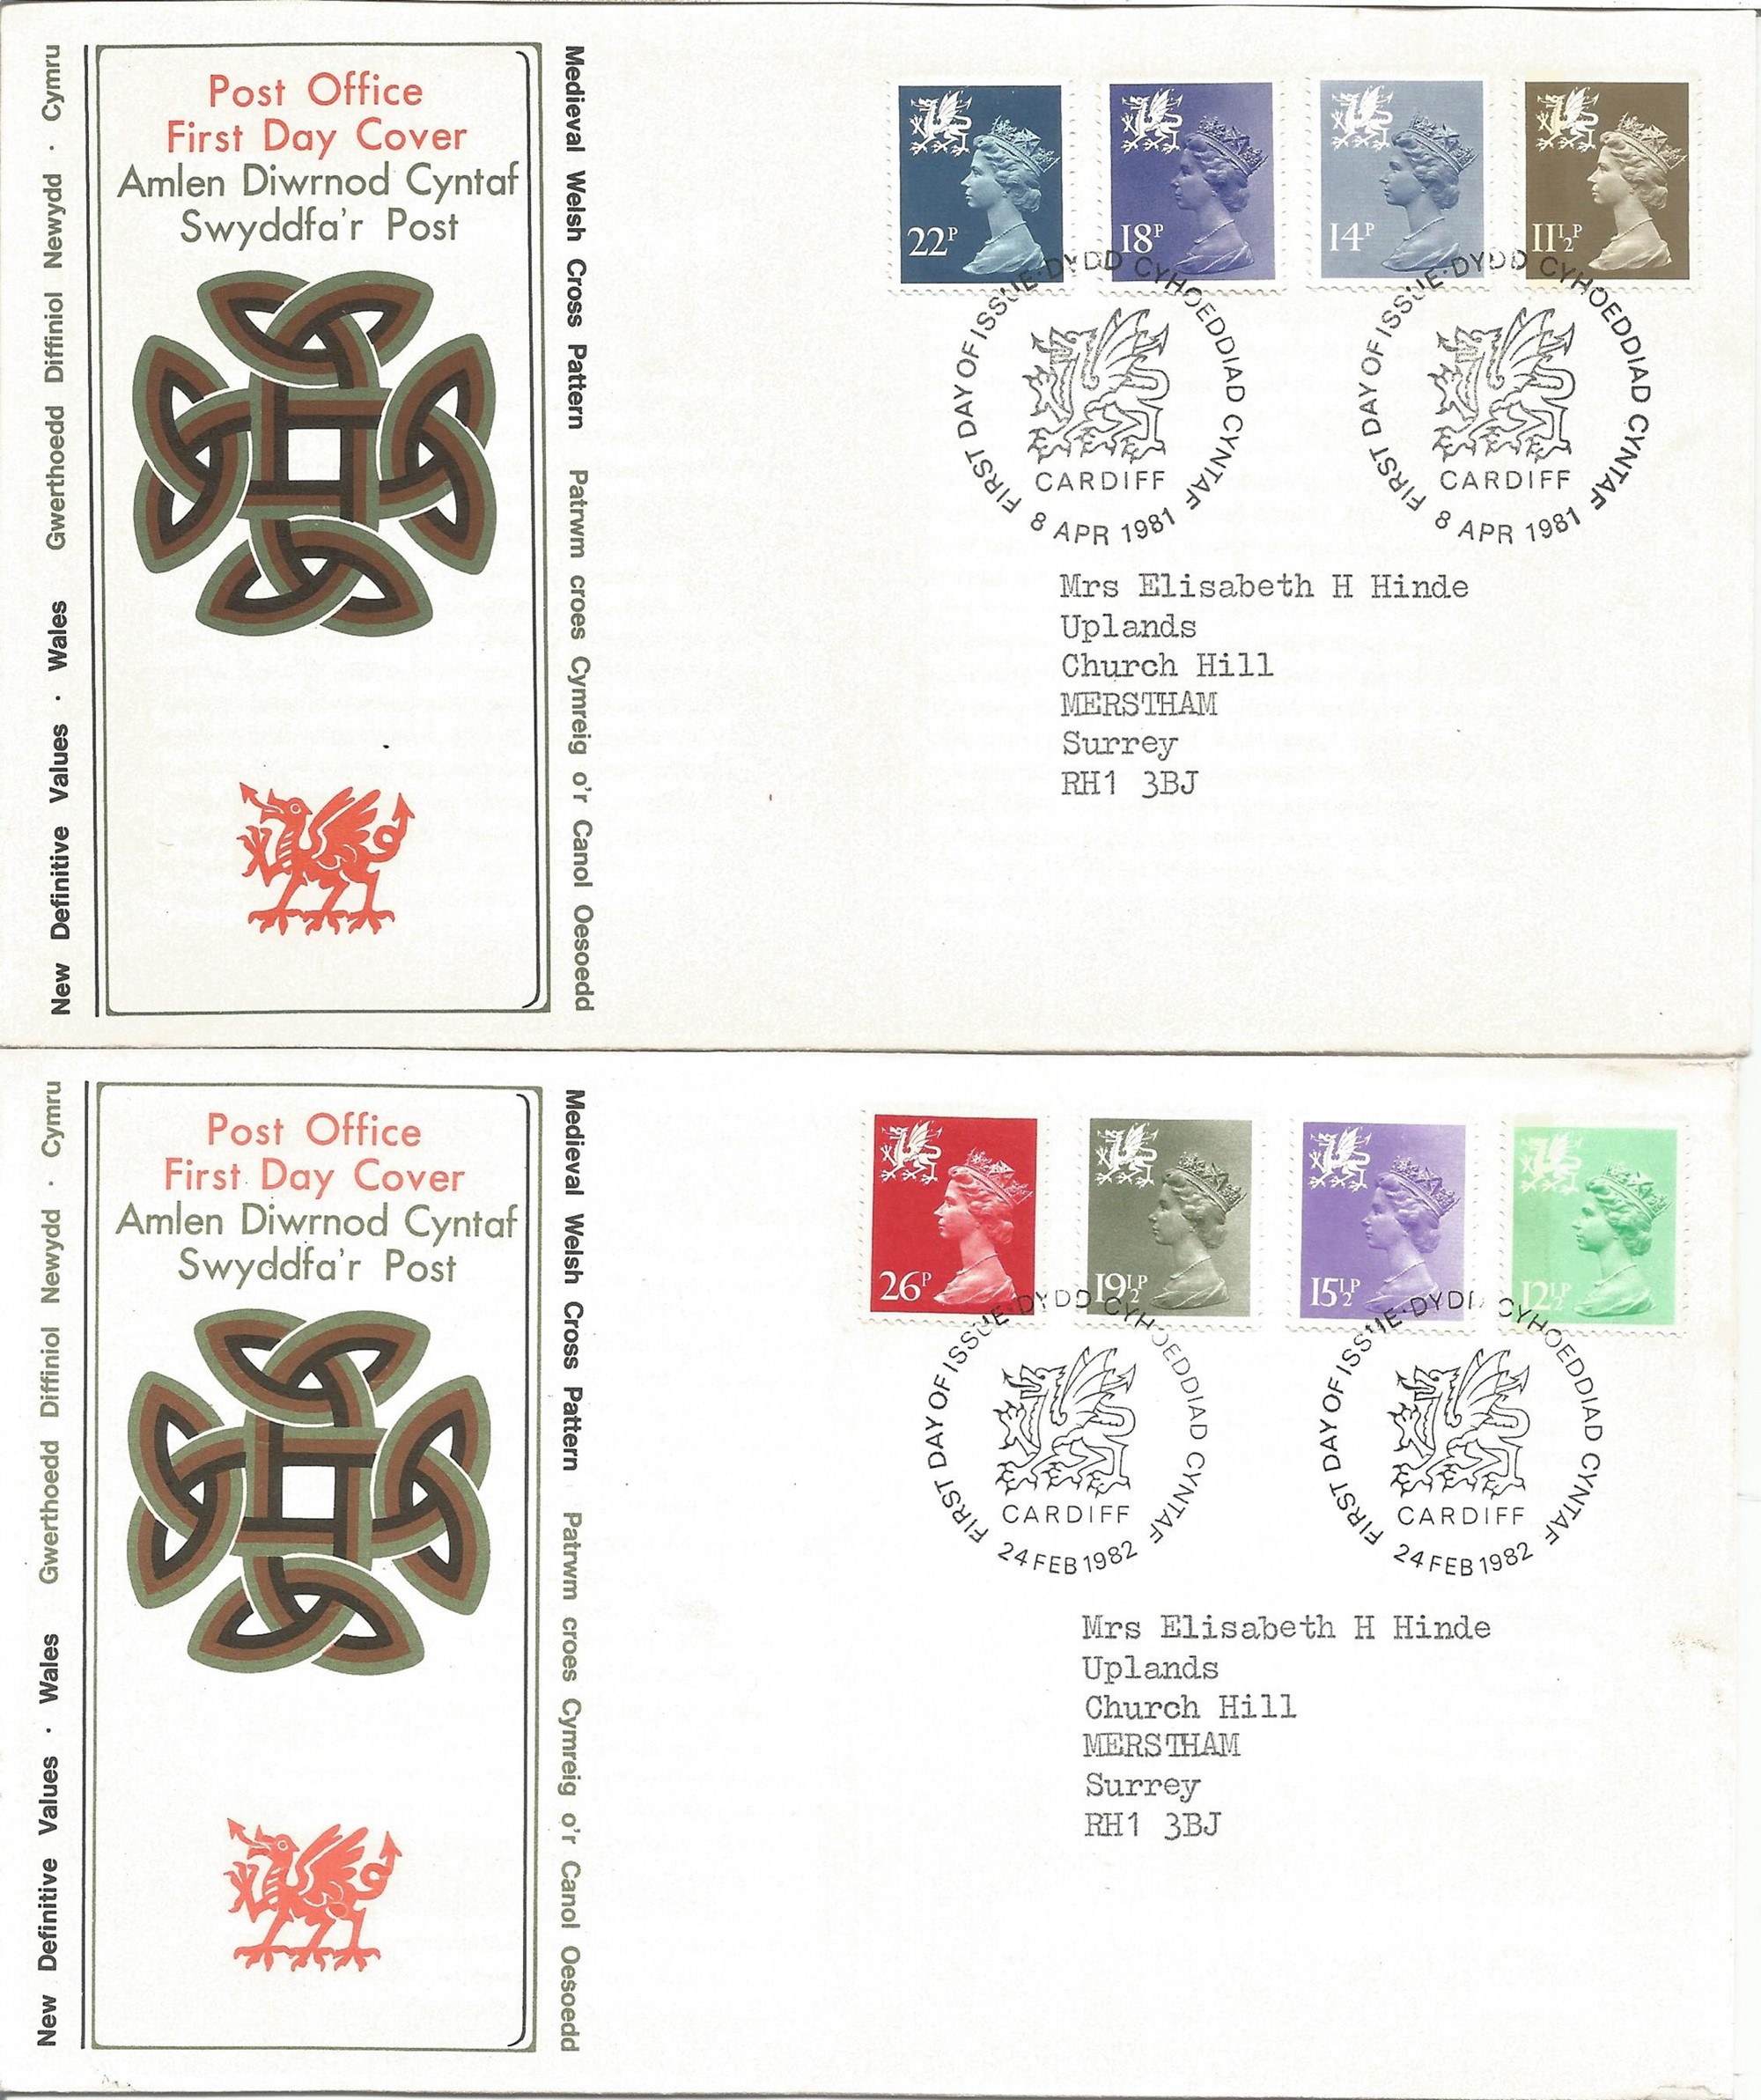 GB regionals FDC collection. Includes 9 Wales 1981/2005, 8 Scotland 1981/2005 and 9 Northern - Image 3 of 3